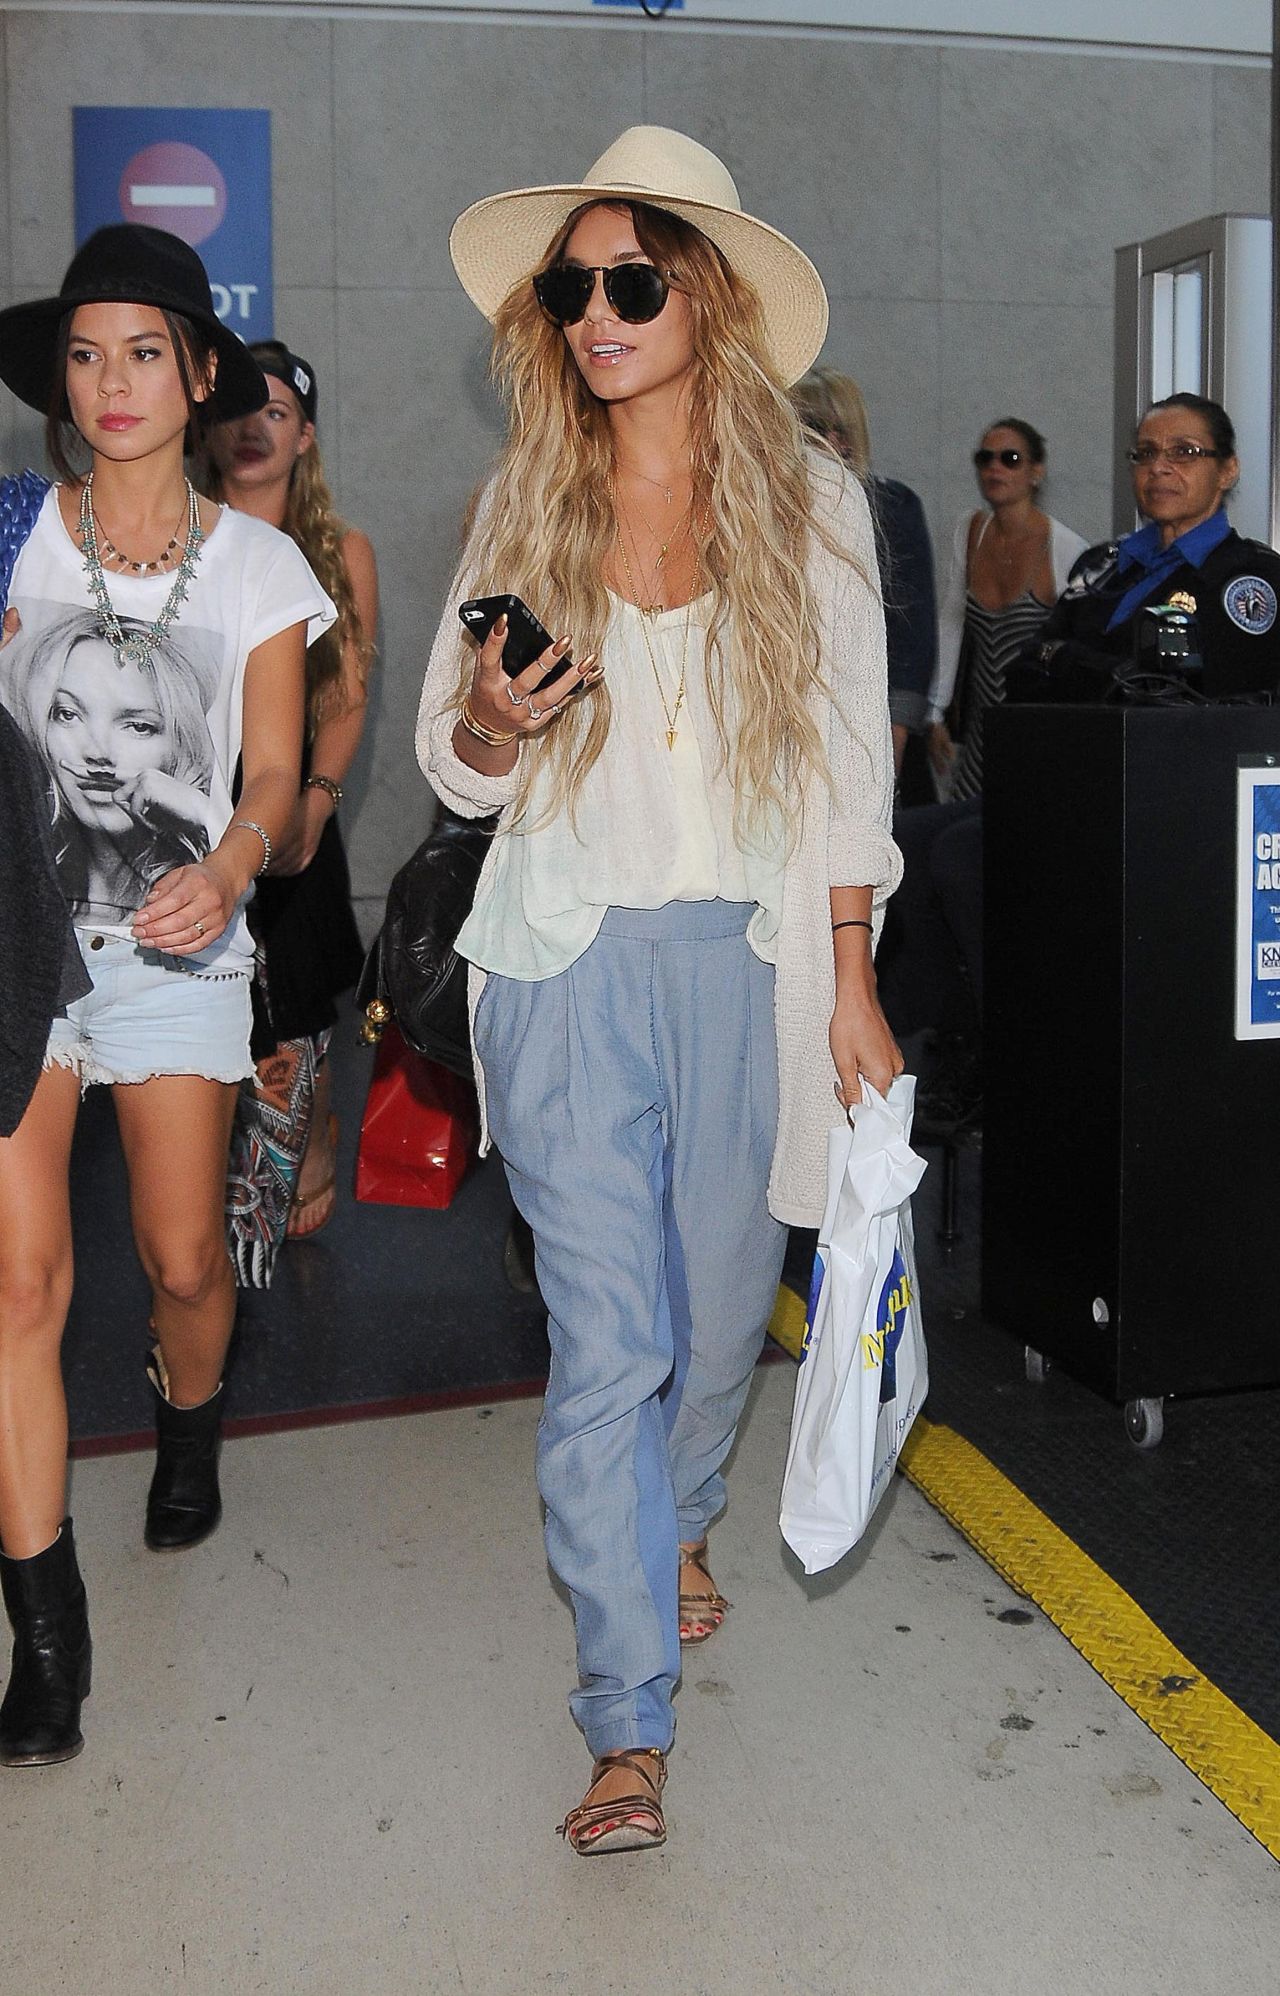 Ashley Tisdale at LAX Airport November 20, 2007 – Star Style